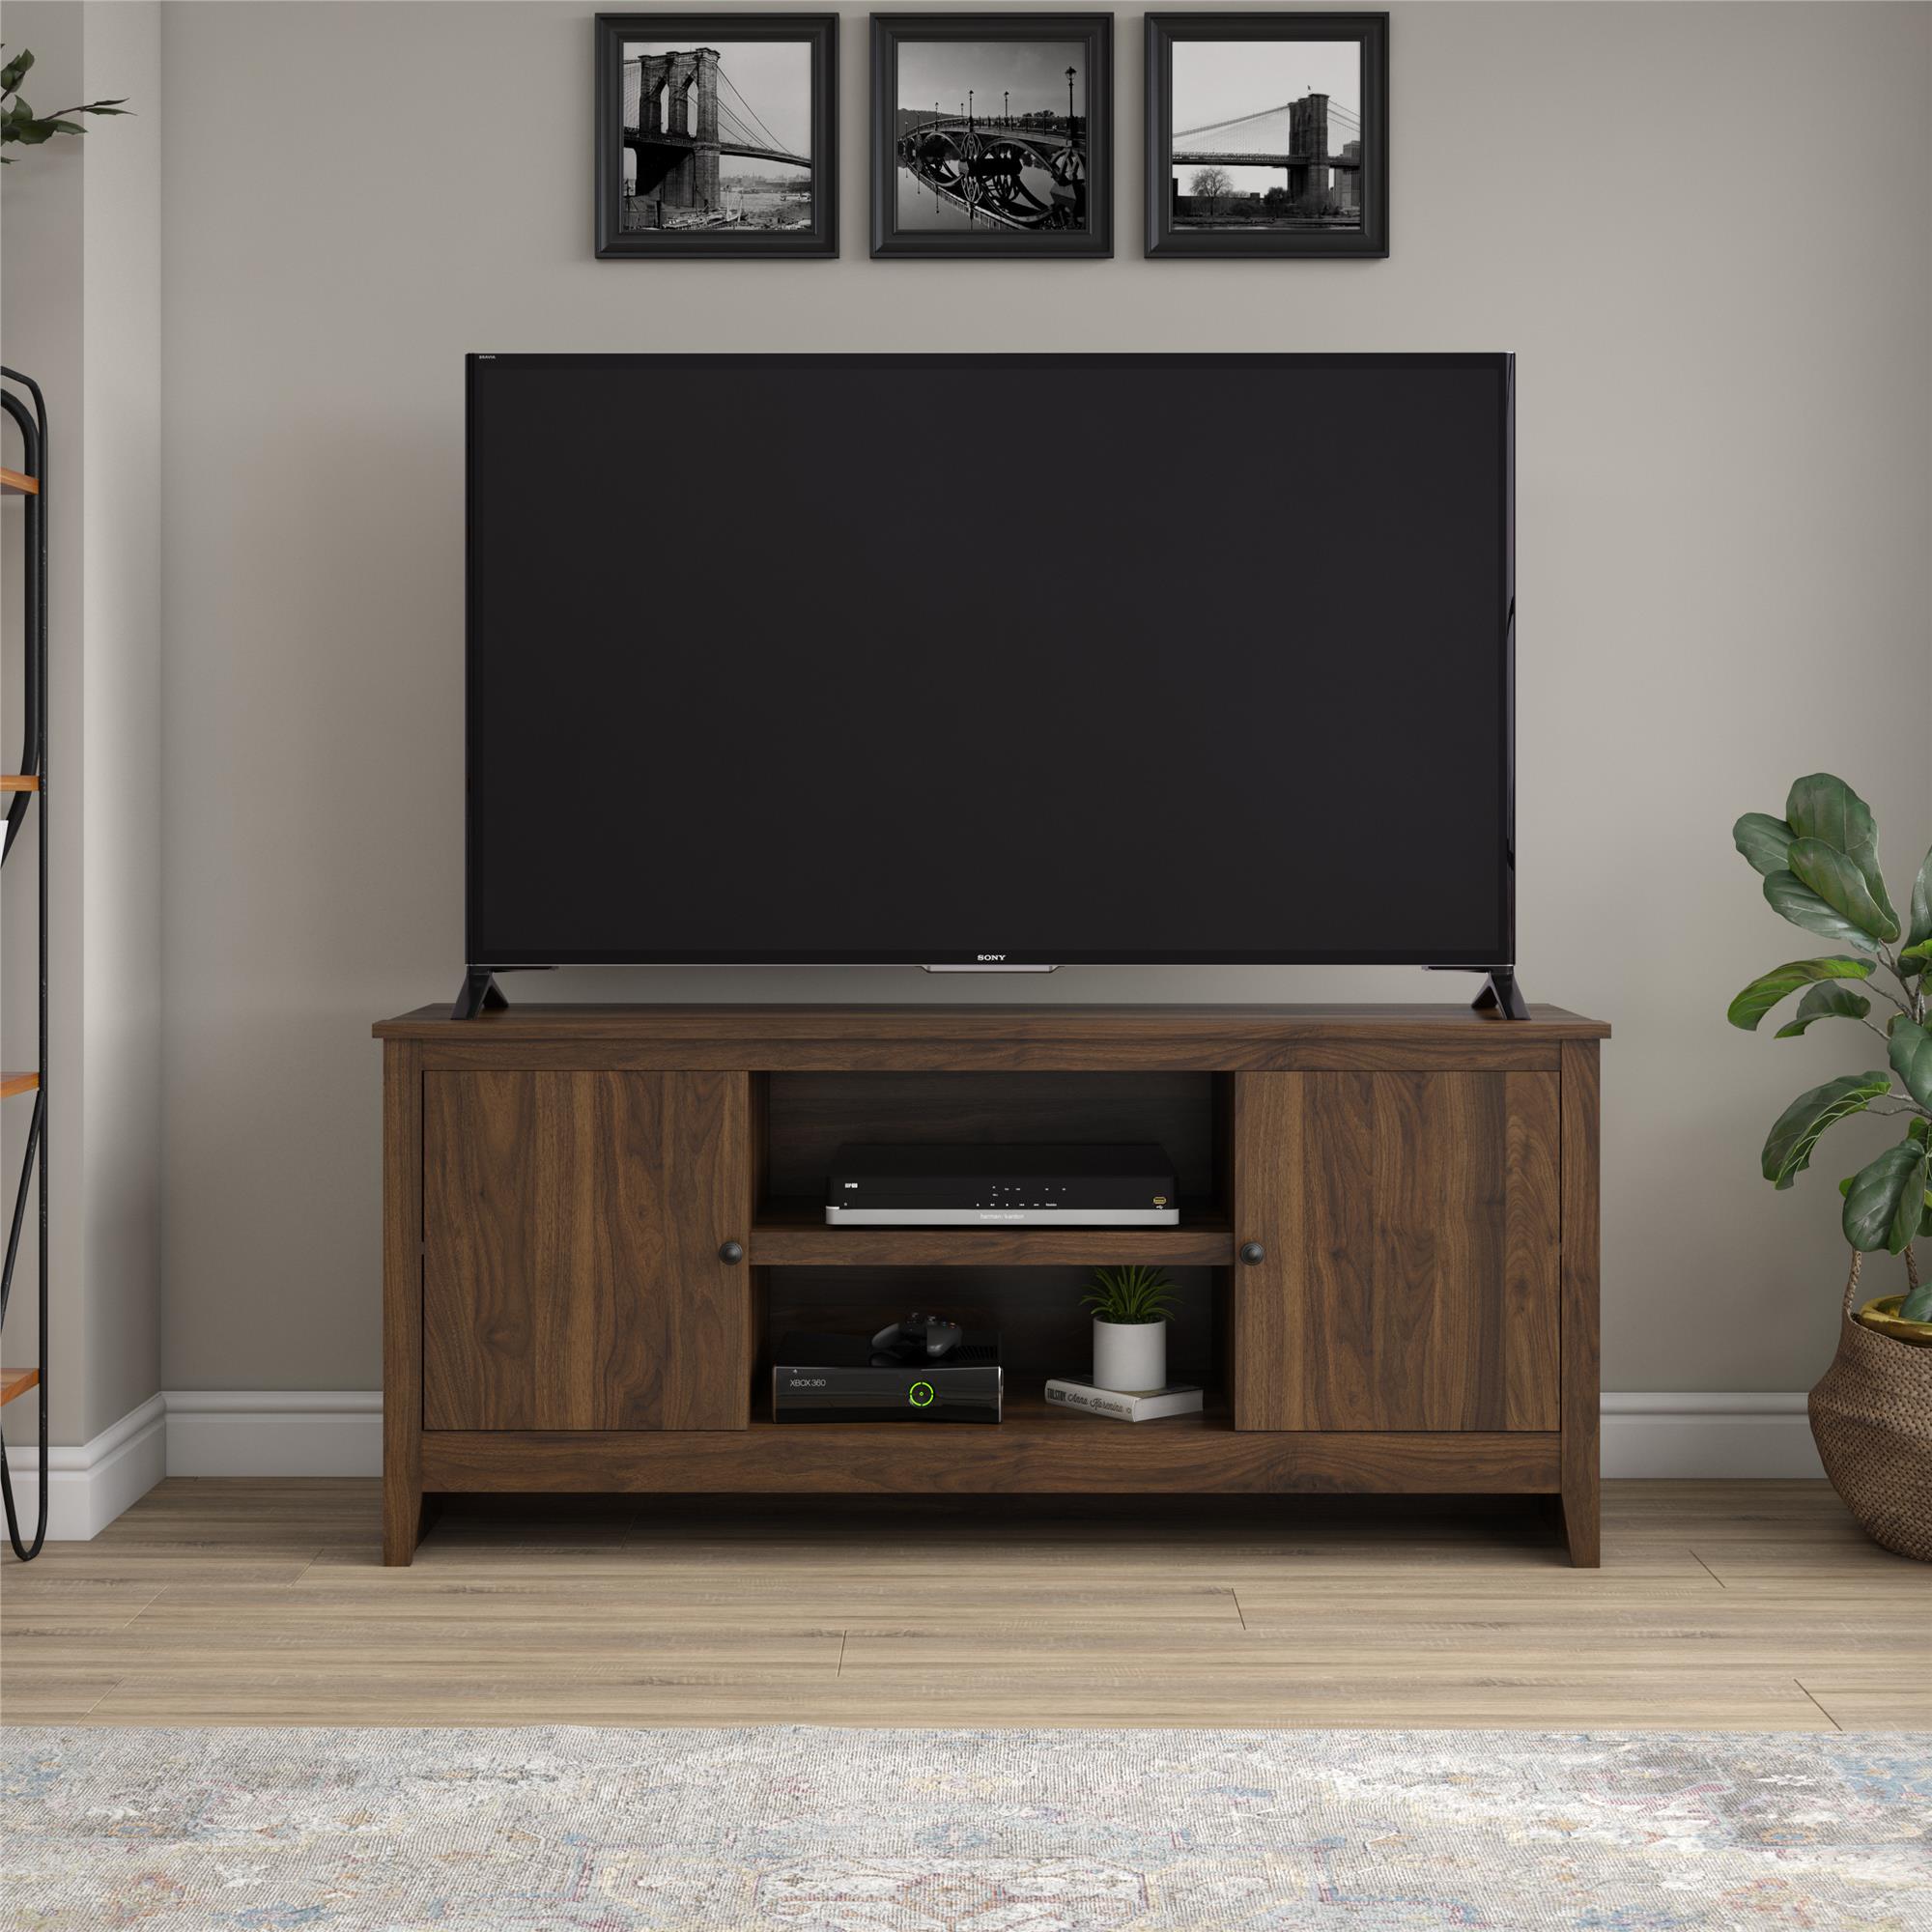 Mainstays TV Stand for TVs up to 65", Walnut - image 1 of 11